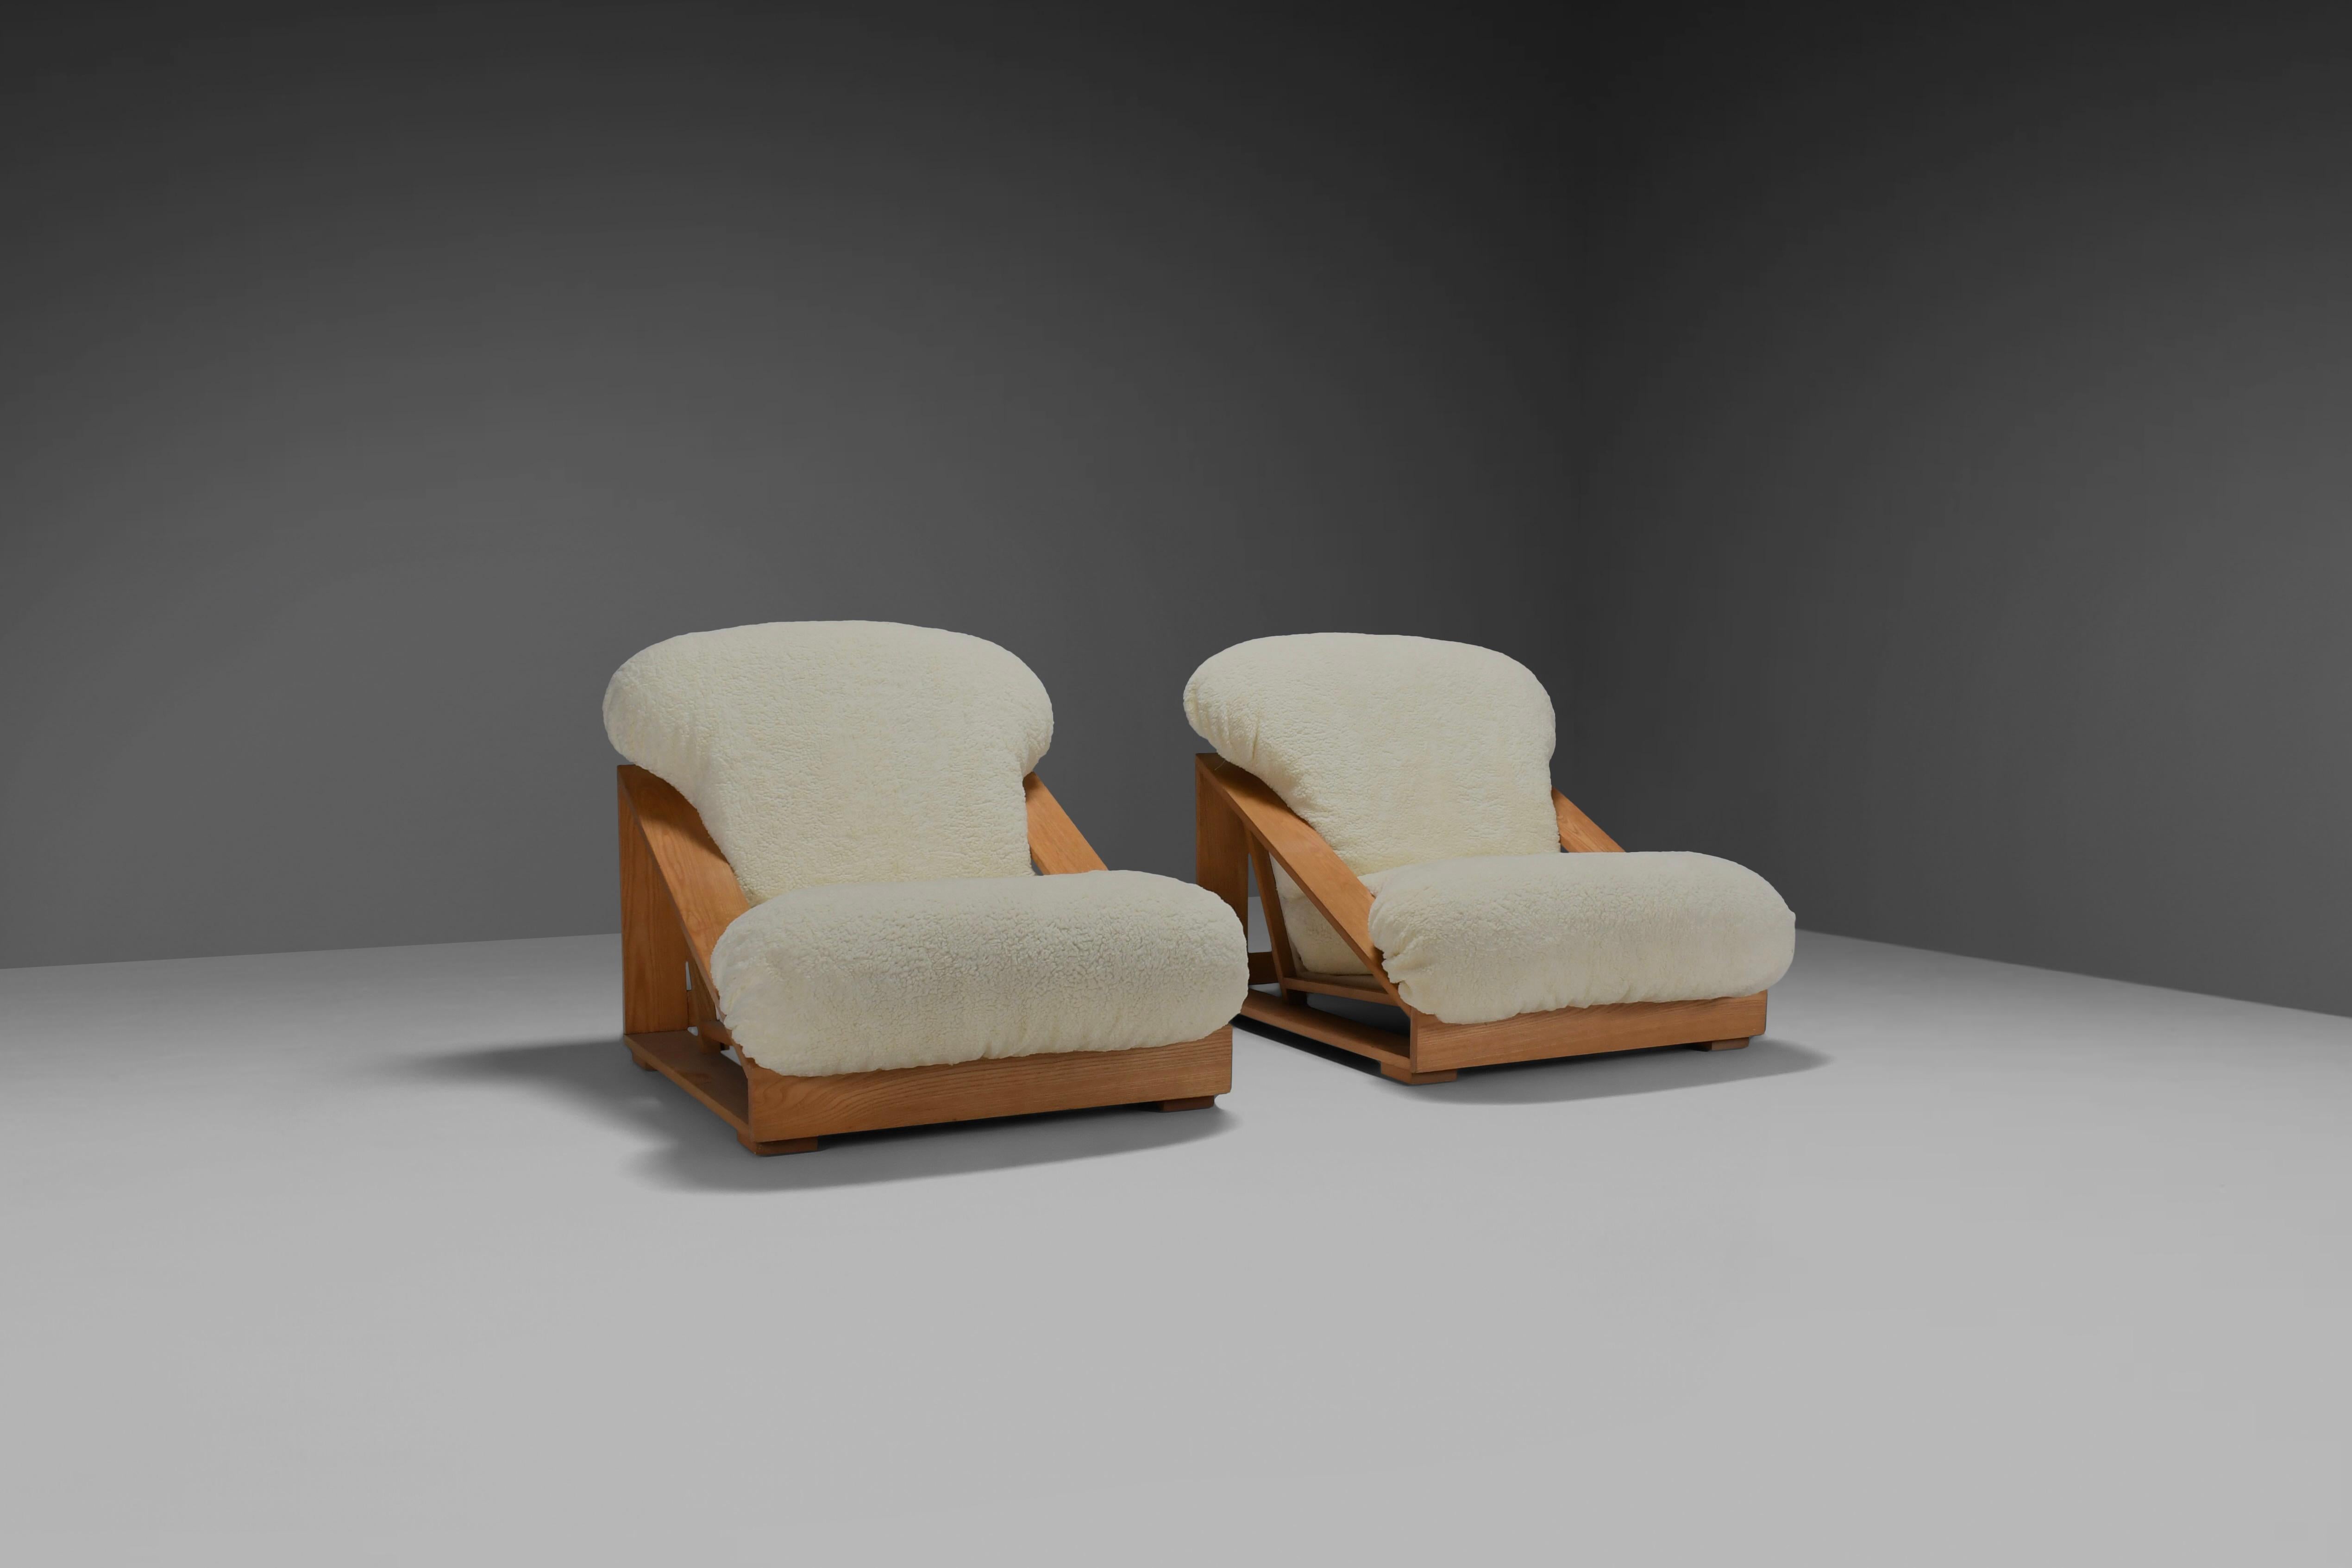 Italian Pine and Teddy Lounge Chairs by Renato Toso and Roberto Pamio for Stilwood, 1970 For Sale